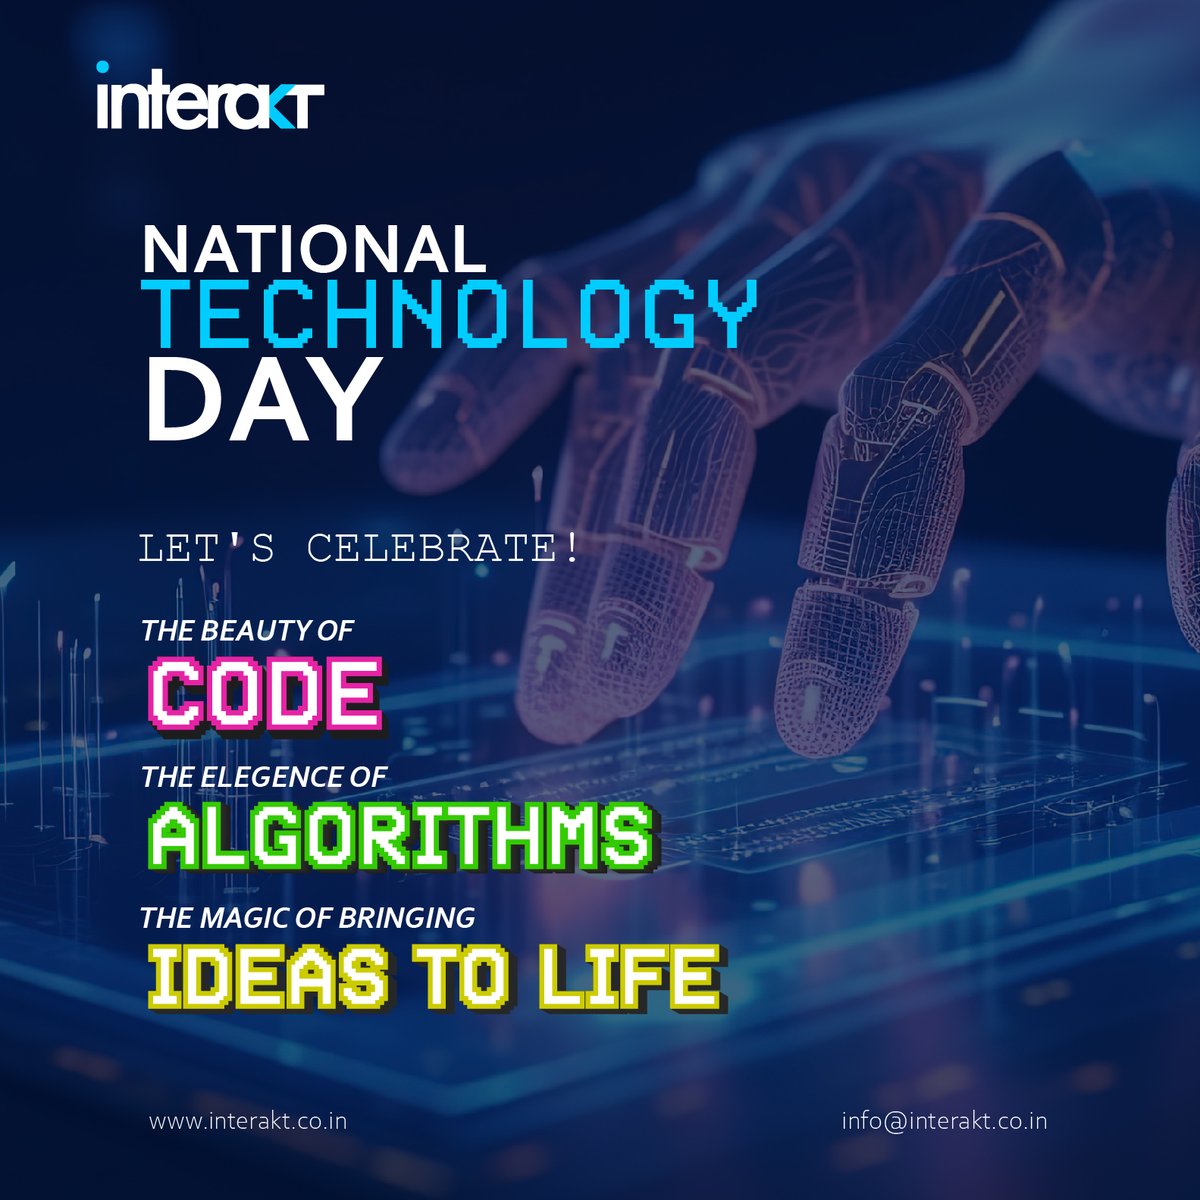 On National Technology Day, Interakt celebrates the spirit of #innovation, the spark of creativity, and the transformative power of #technology!

We're passionate about leveraging technology to empower businesses, streamline processes, and bring groundbreaking ideas to life.